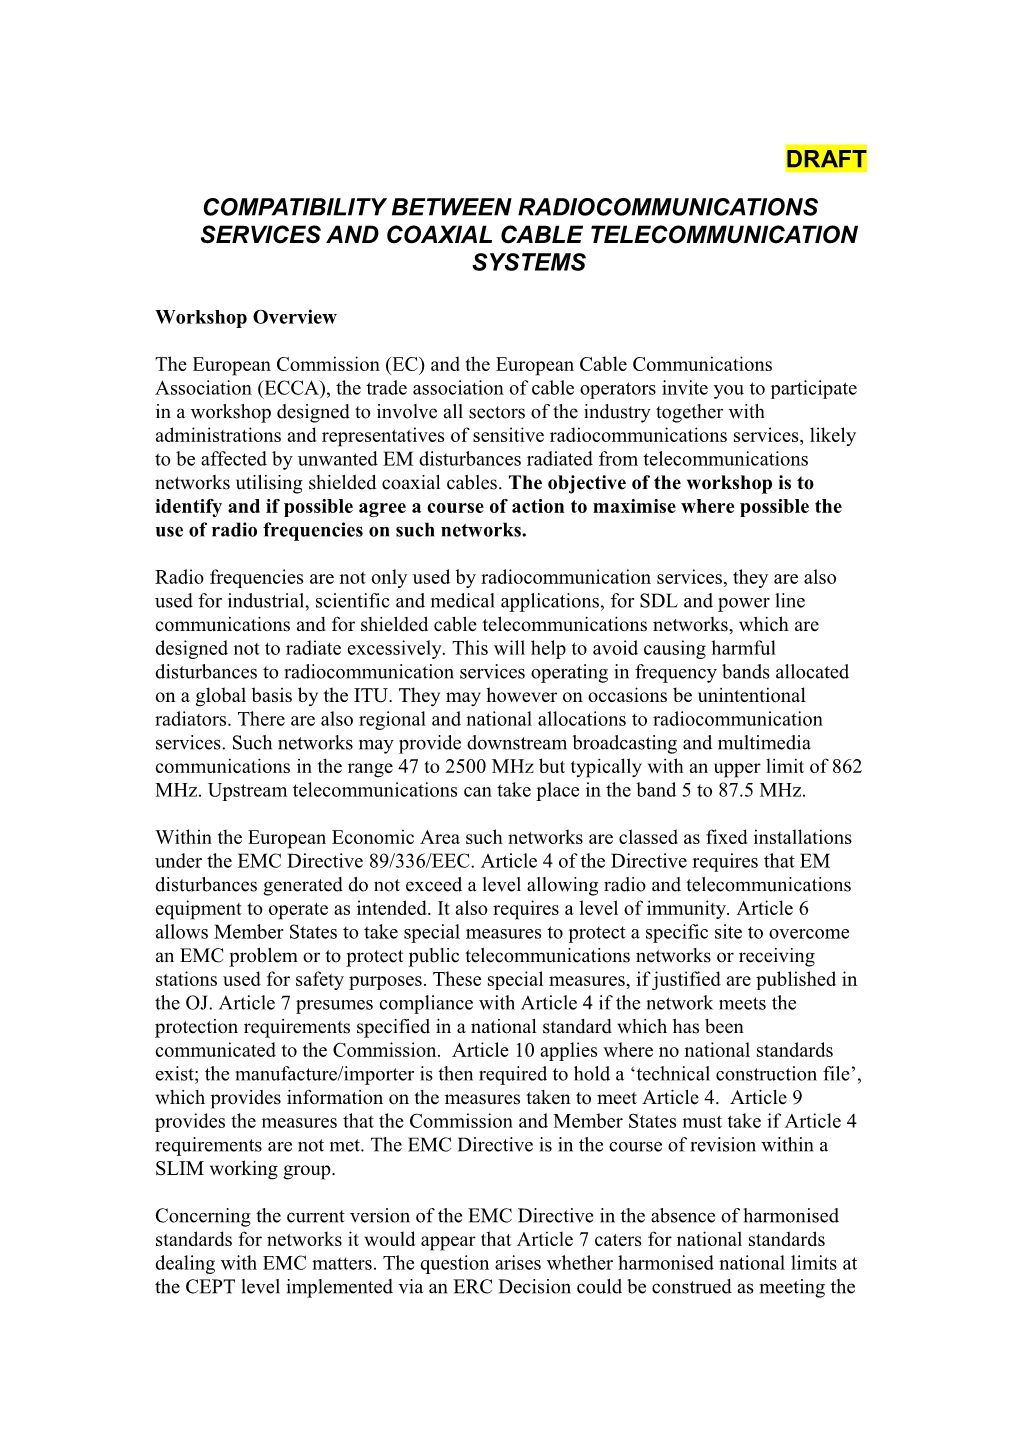 Comaptibility Between Radiocommunications Services and Co-Axial Cable Telecommunication Systems